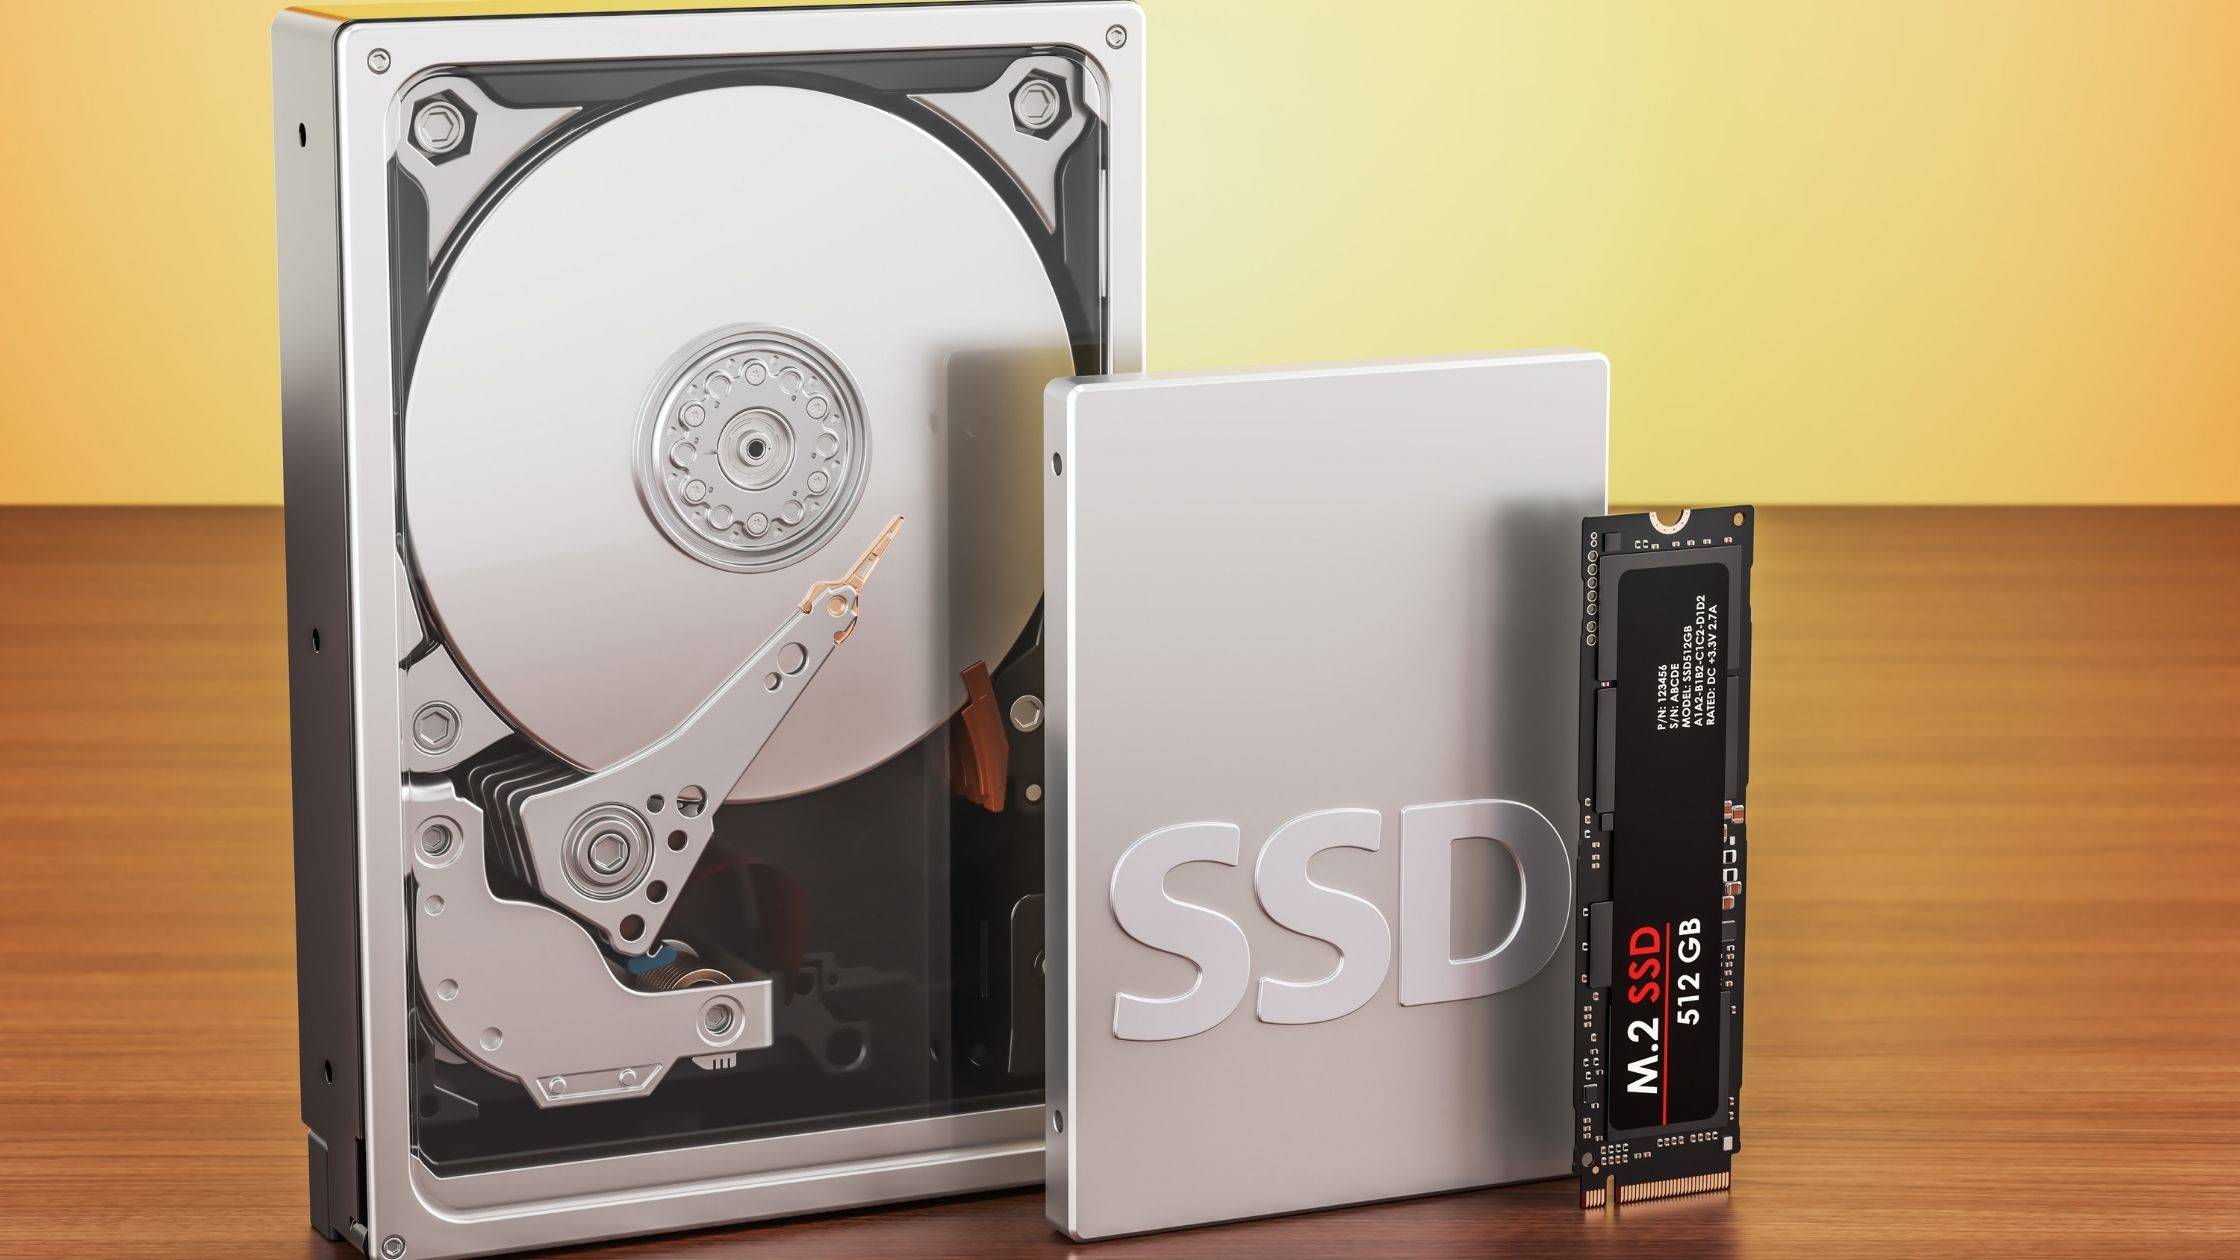 Ungdom håndjern Tale M.2 SSD Vs SATA SSD VS HDD External Hard drives What is the difference? –  Juiced Systems